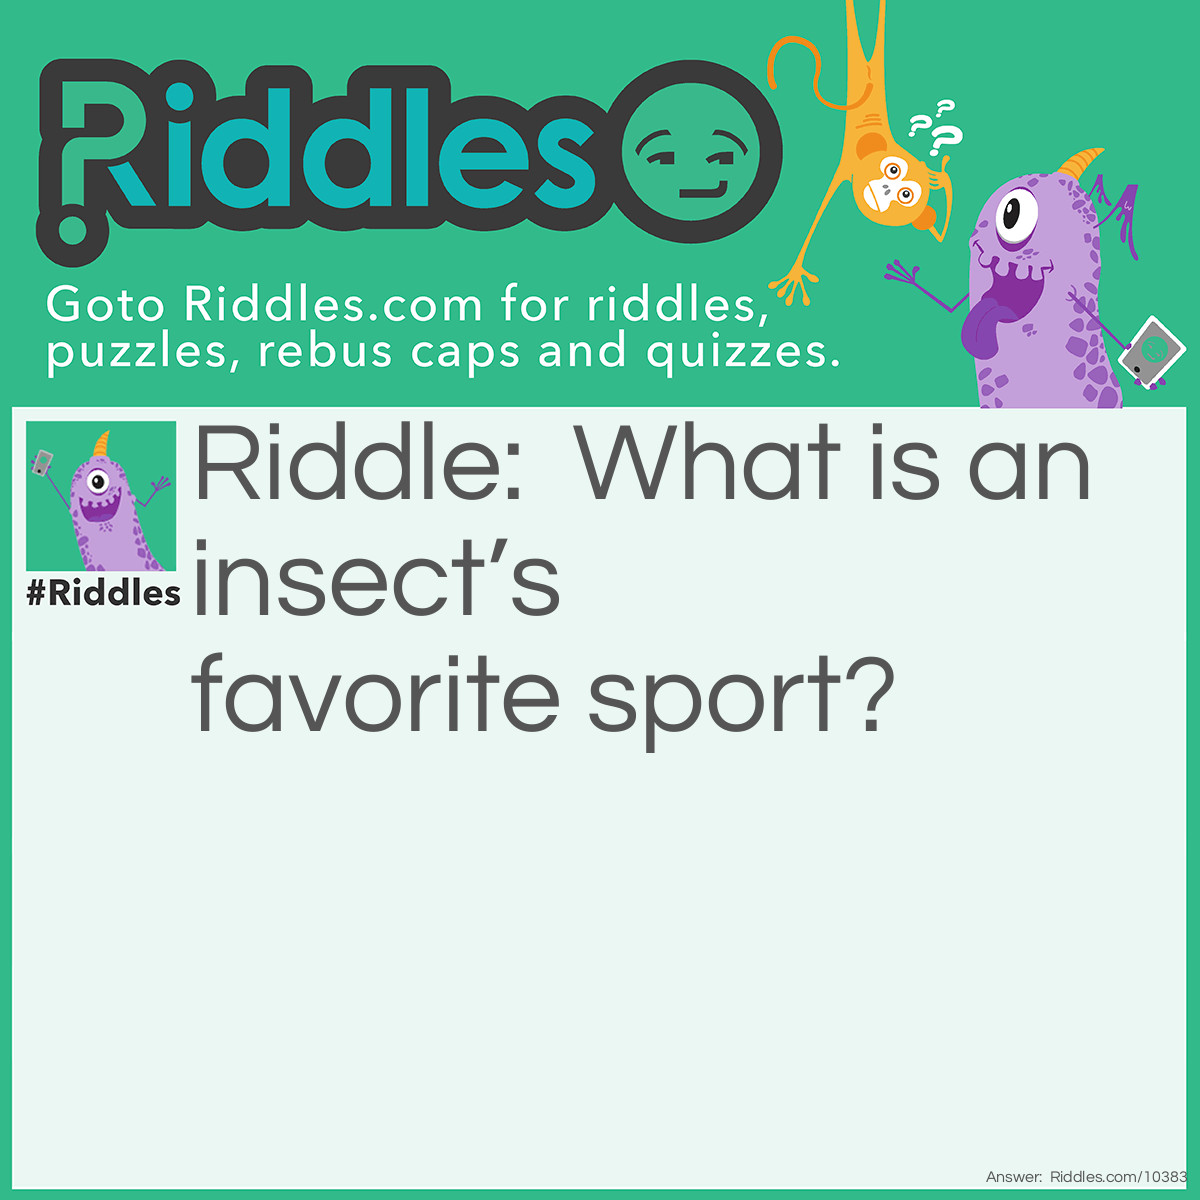 Riddle: What is an insect’s favorite sport? Answer: Cricket.